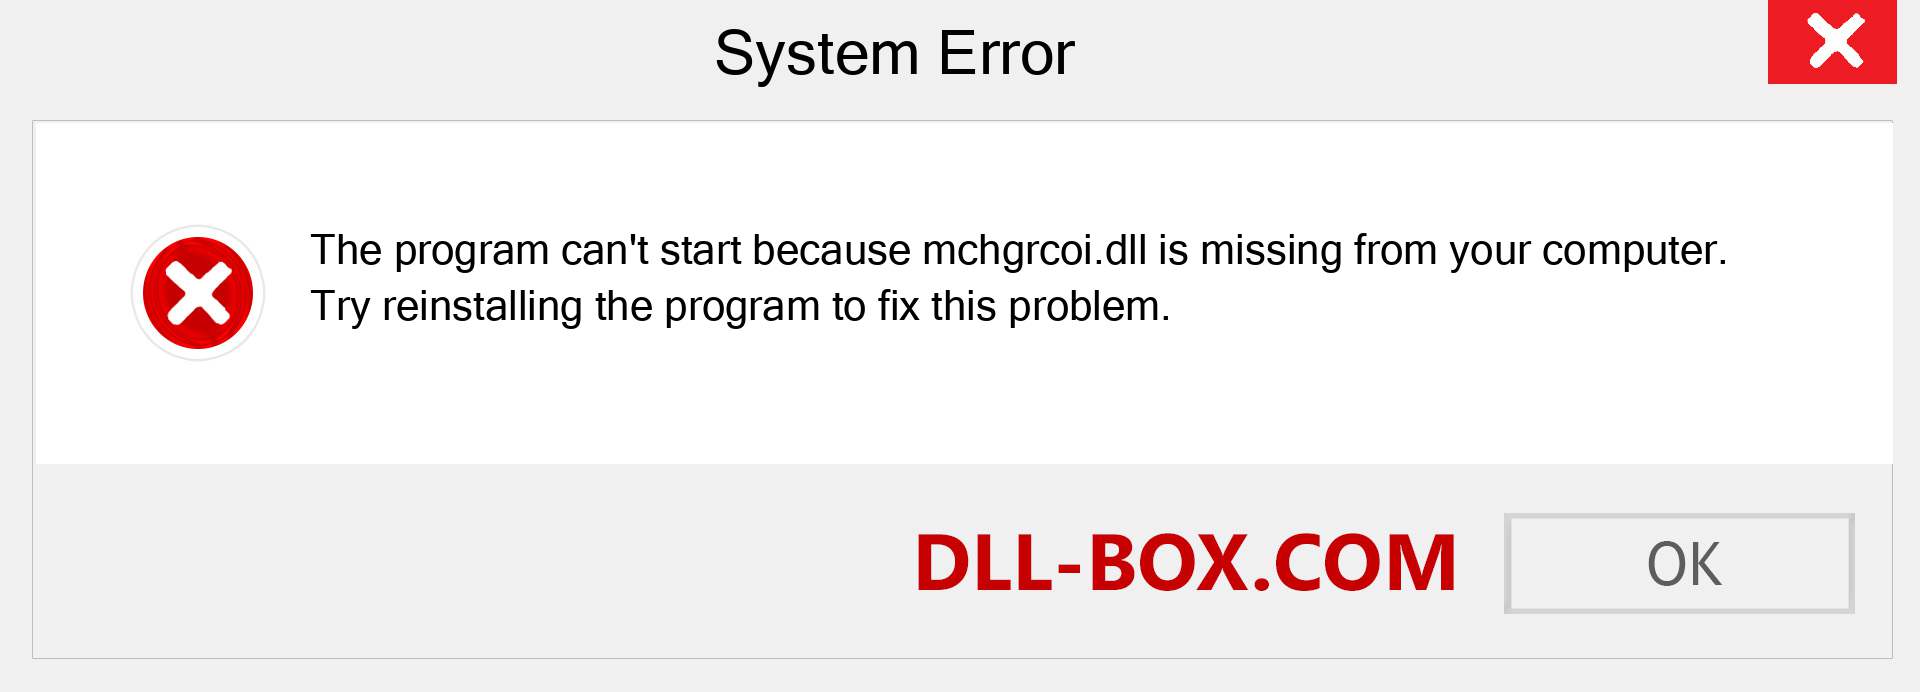  mchgrcoi.dll file is missing?. Download for Windows 7, 8, 10 - Fix  mchgrcoi dll Missing Error on Windows, photos, images